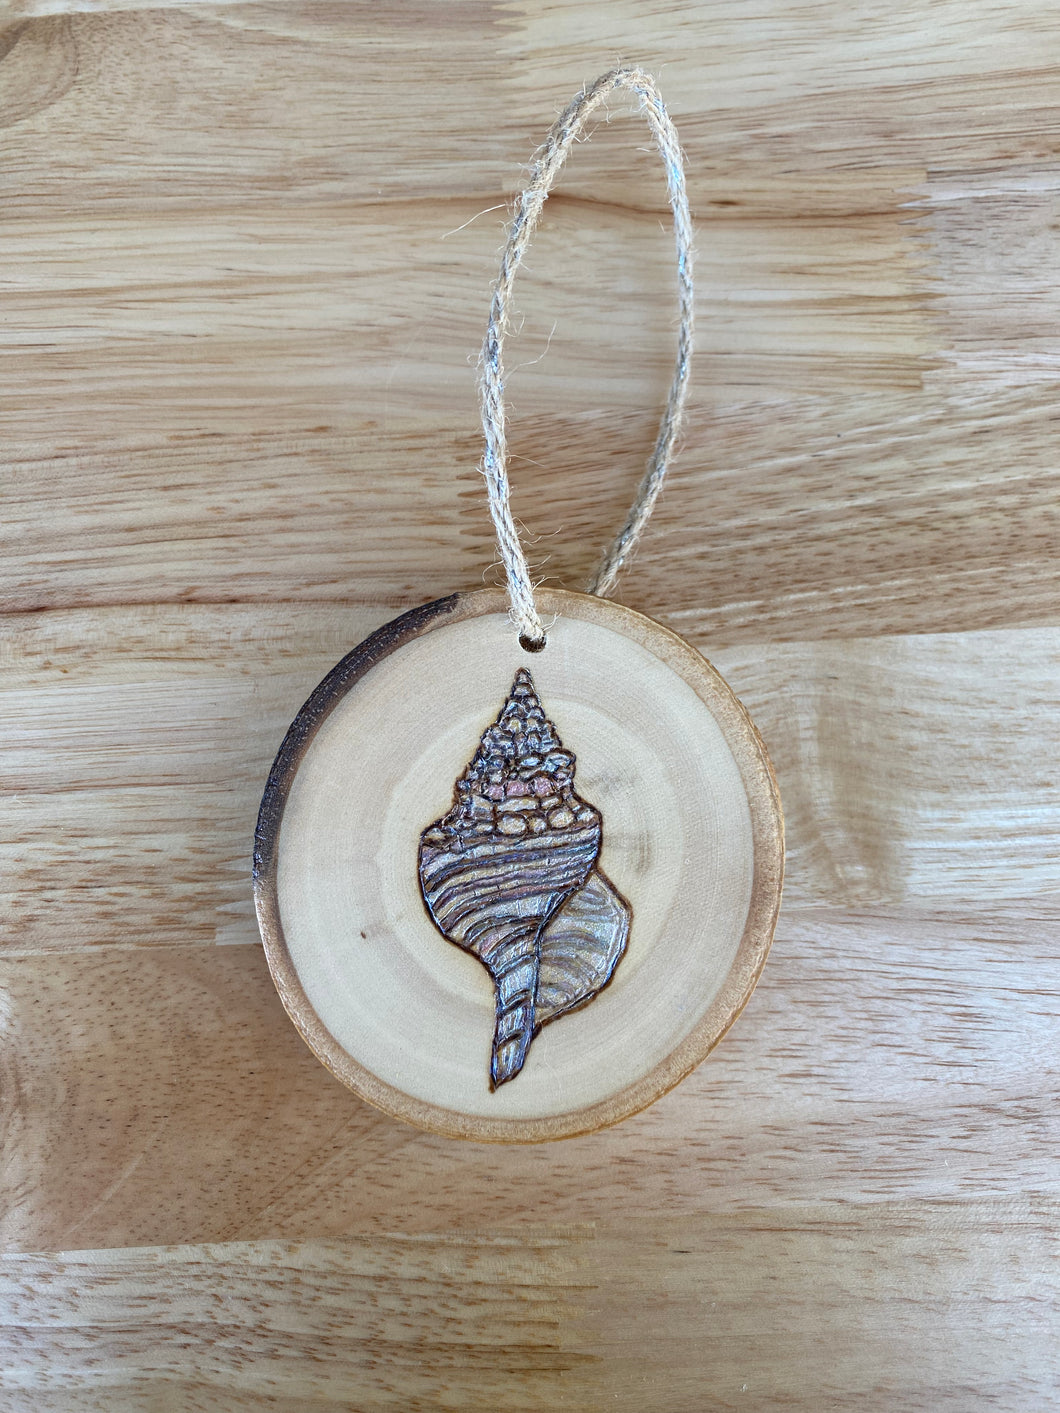 Tinted Cantharus Shell Wood Burned Ornament